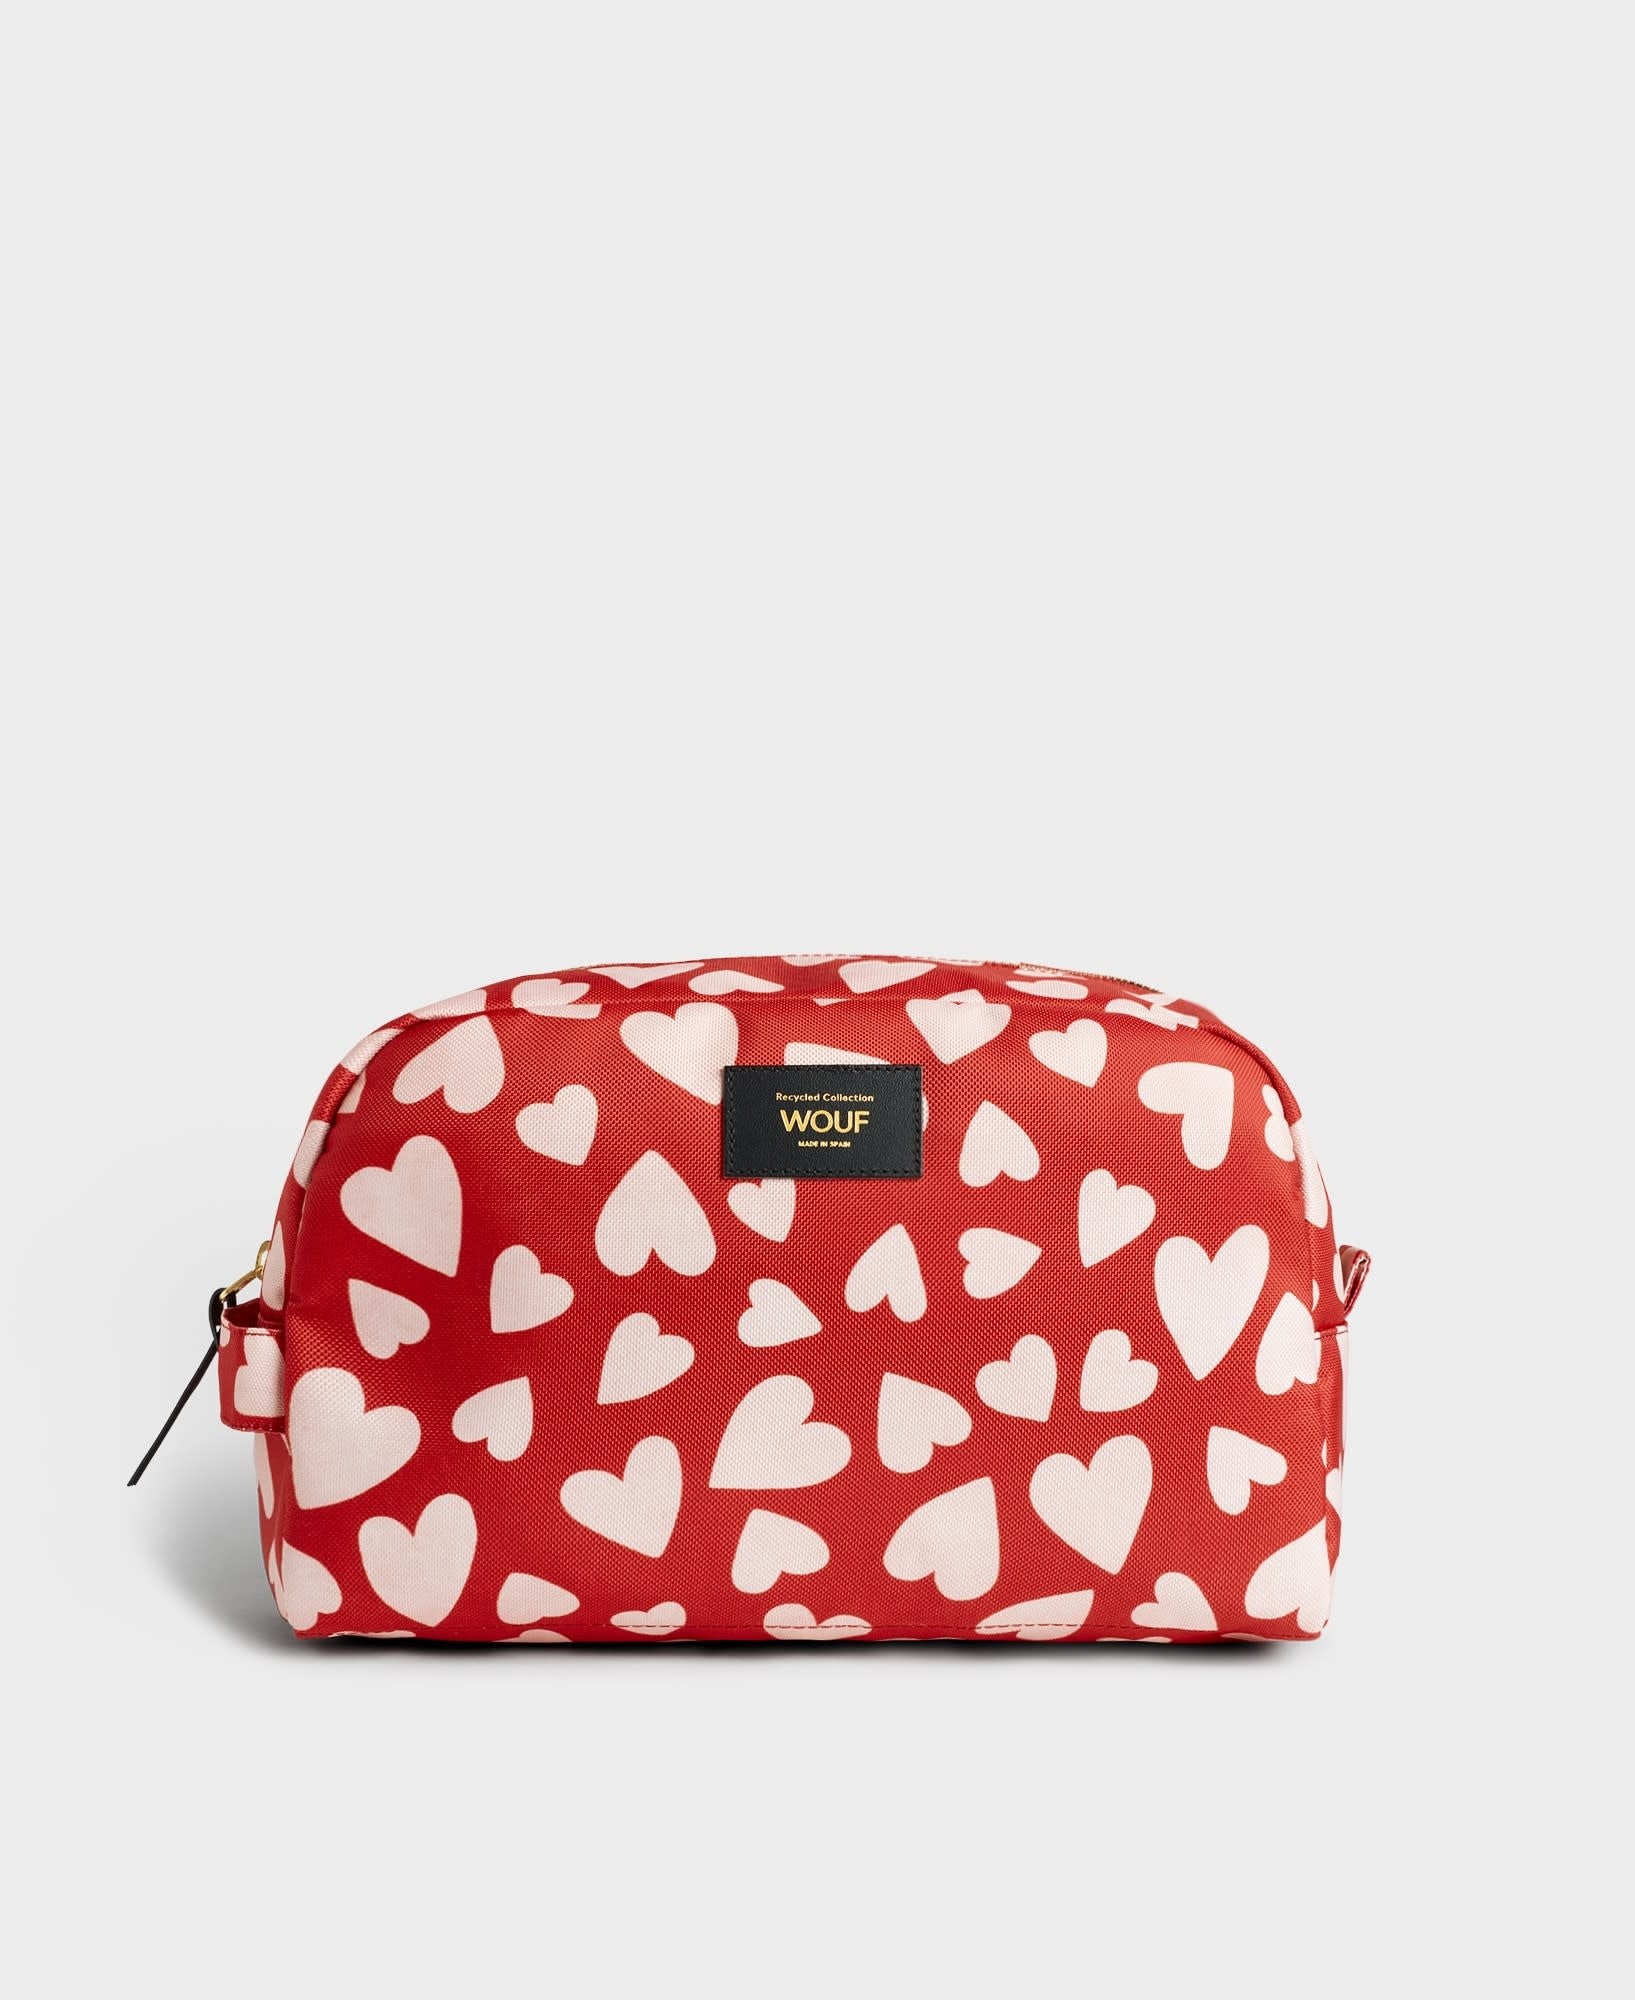 Grande Trousse - Amore - Wouf